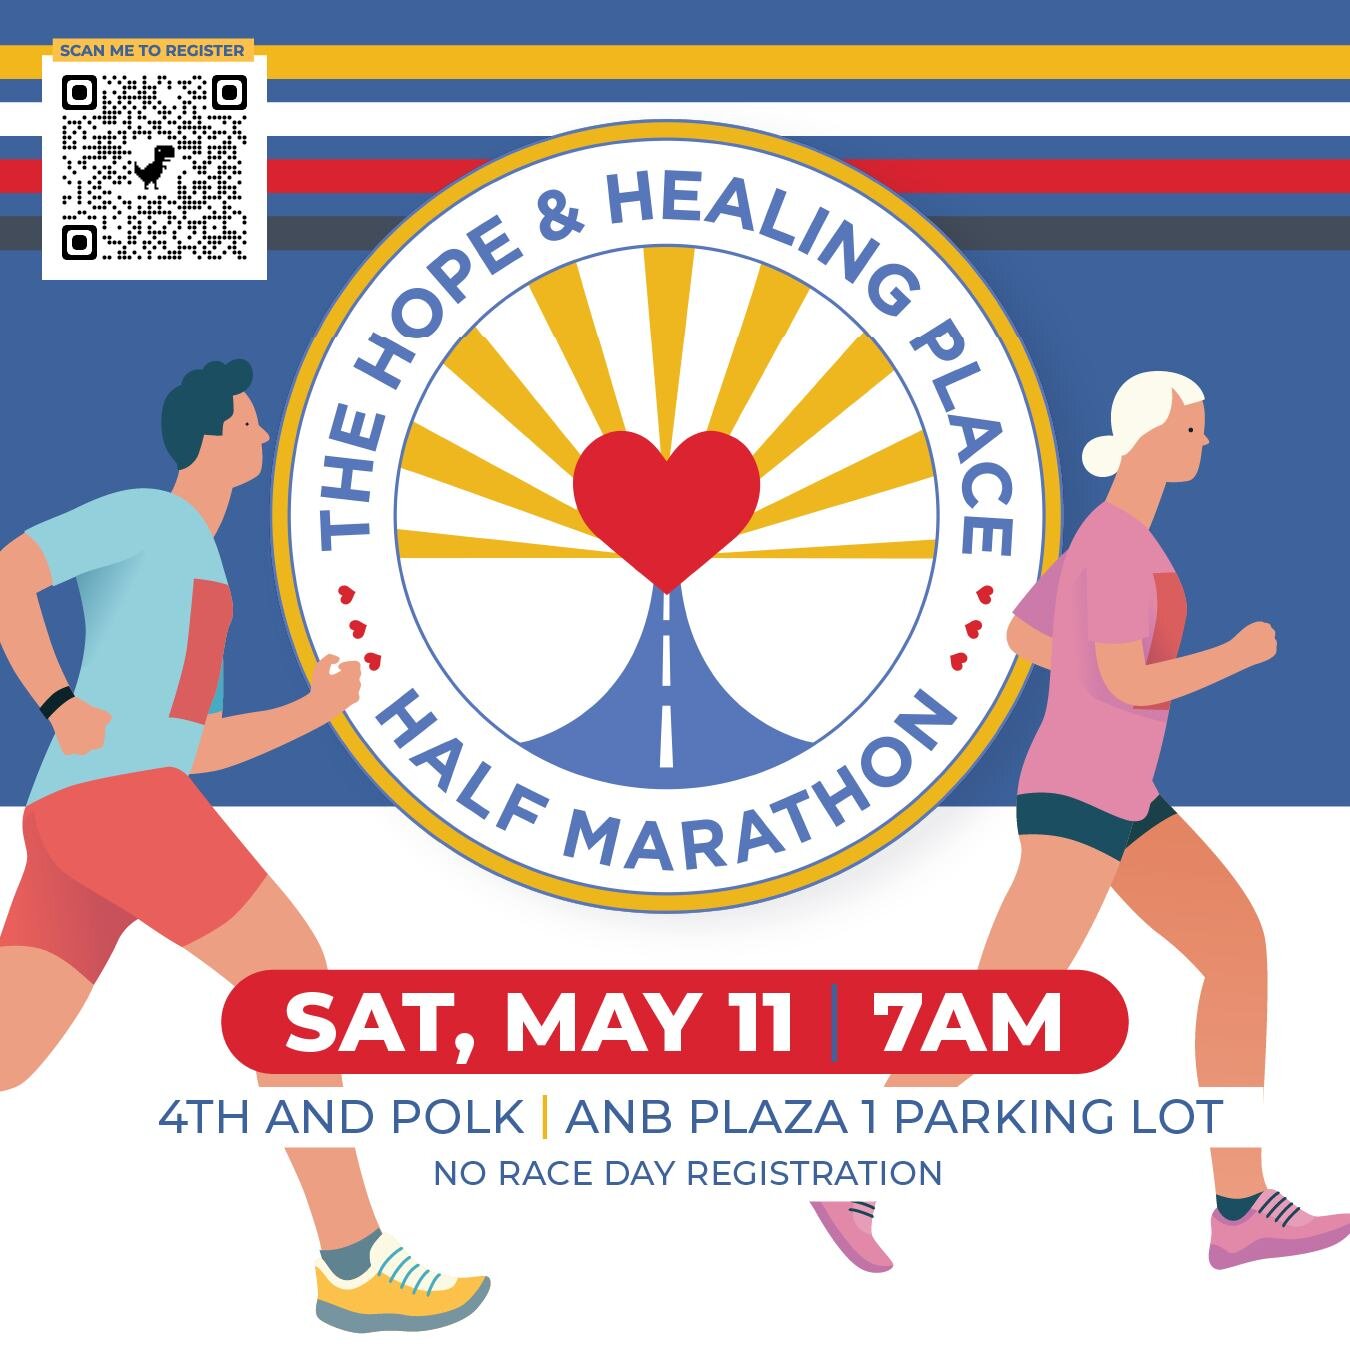 Join us for our 15th Annual Half Marathon on May 11th! 

Lace up and run through scenic downtown Amarillo in support of The Hope &amp; Healing Place. Your participation helps us continue to offer free grief resources to our community. 

Register now: